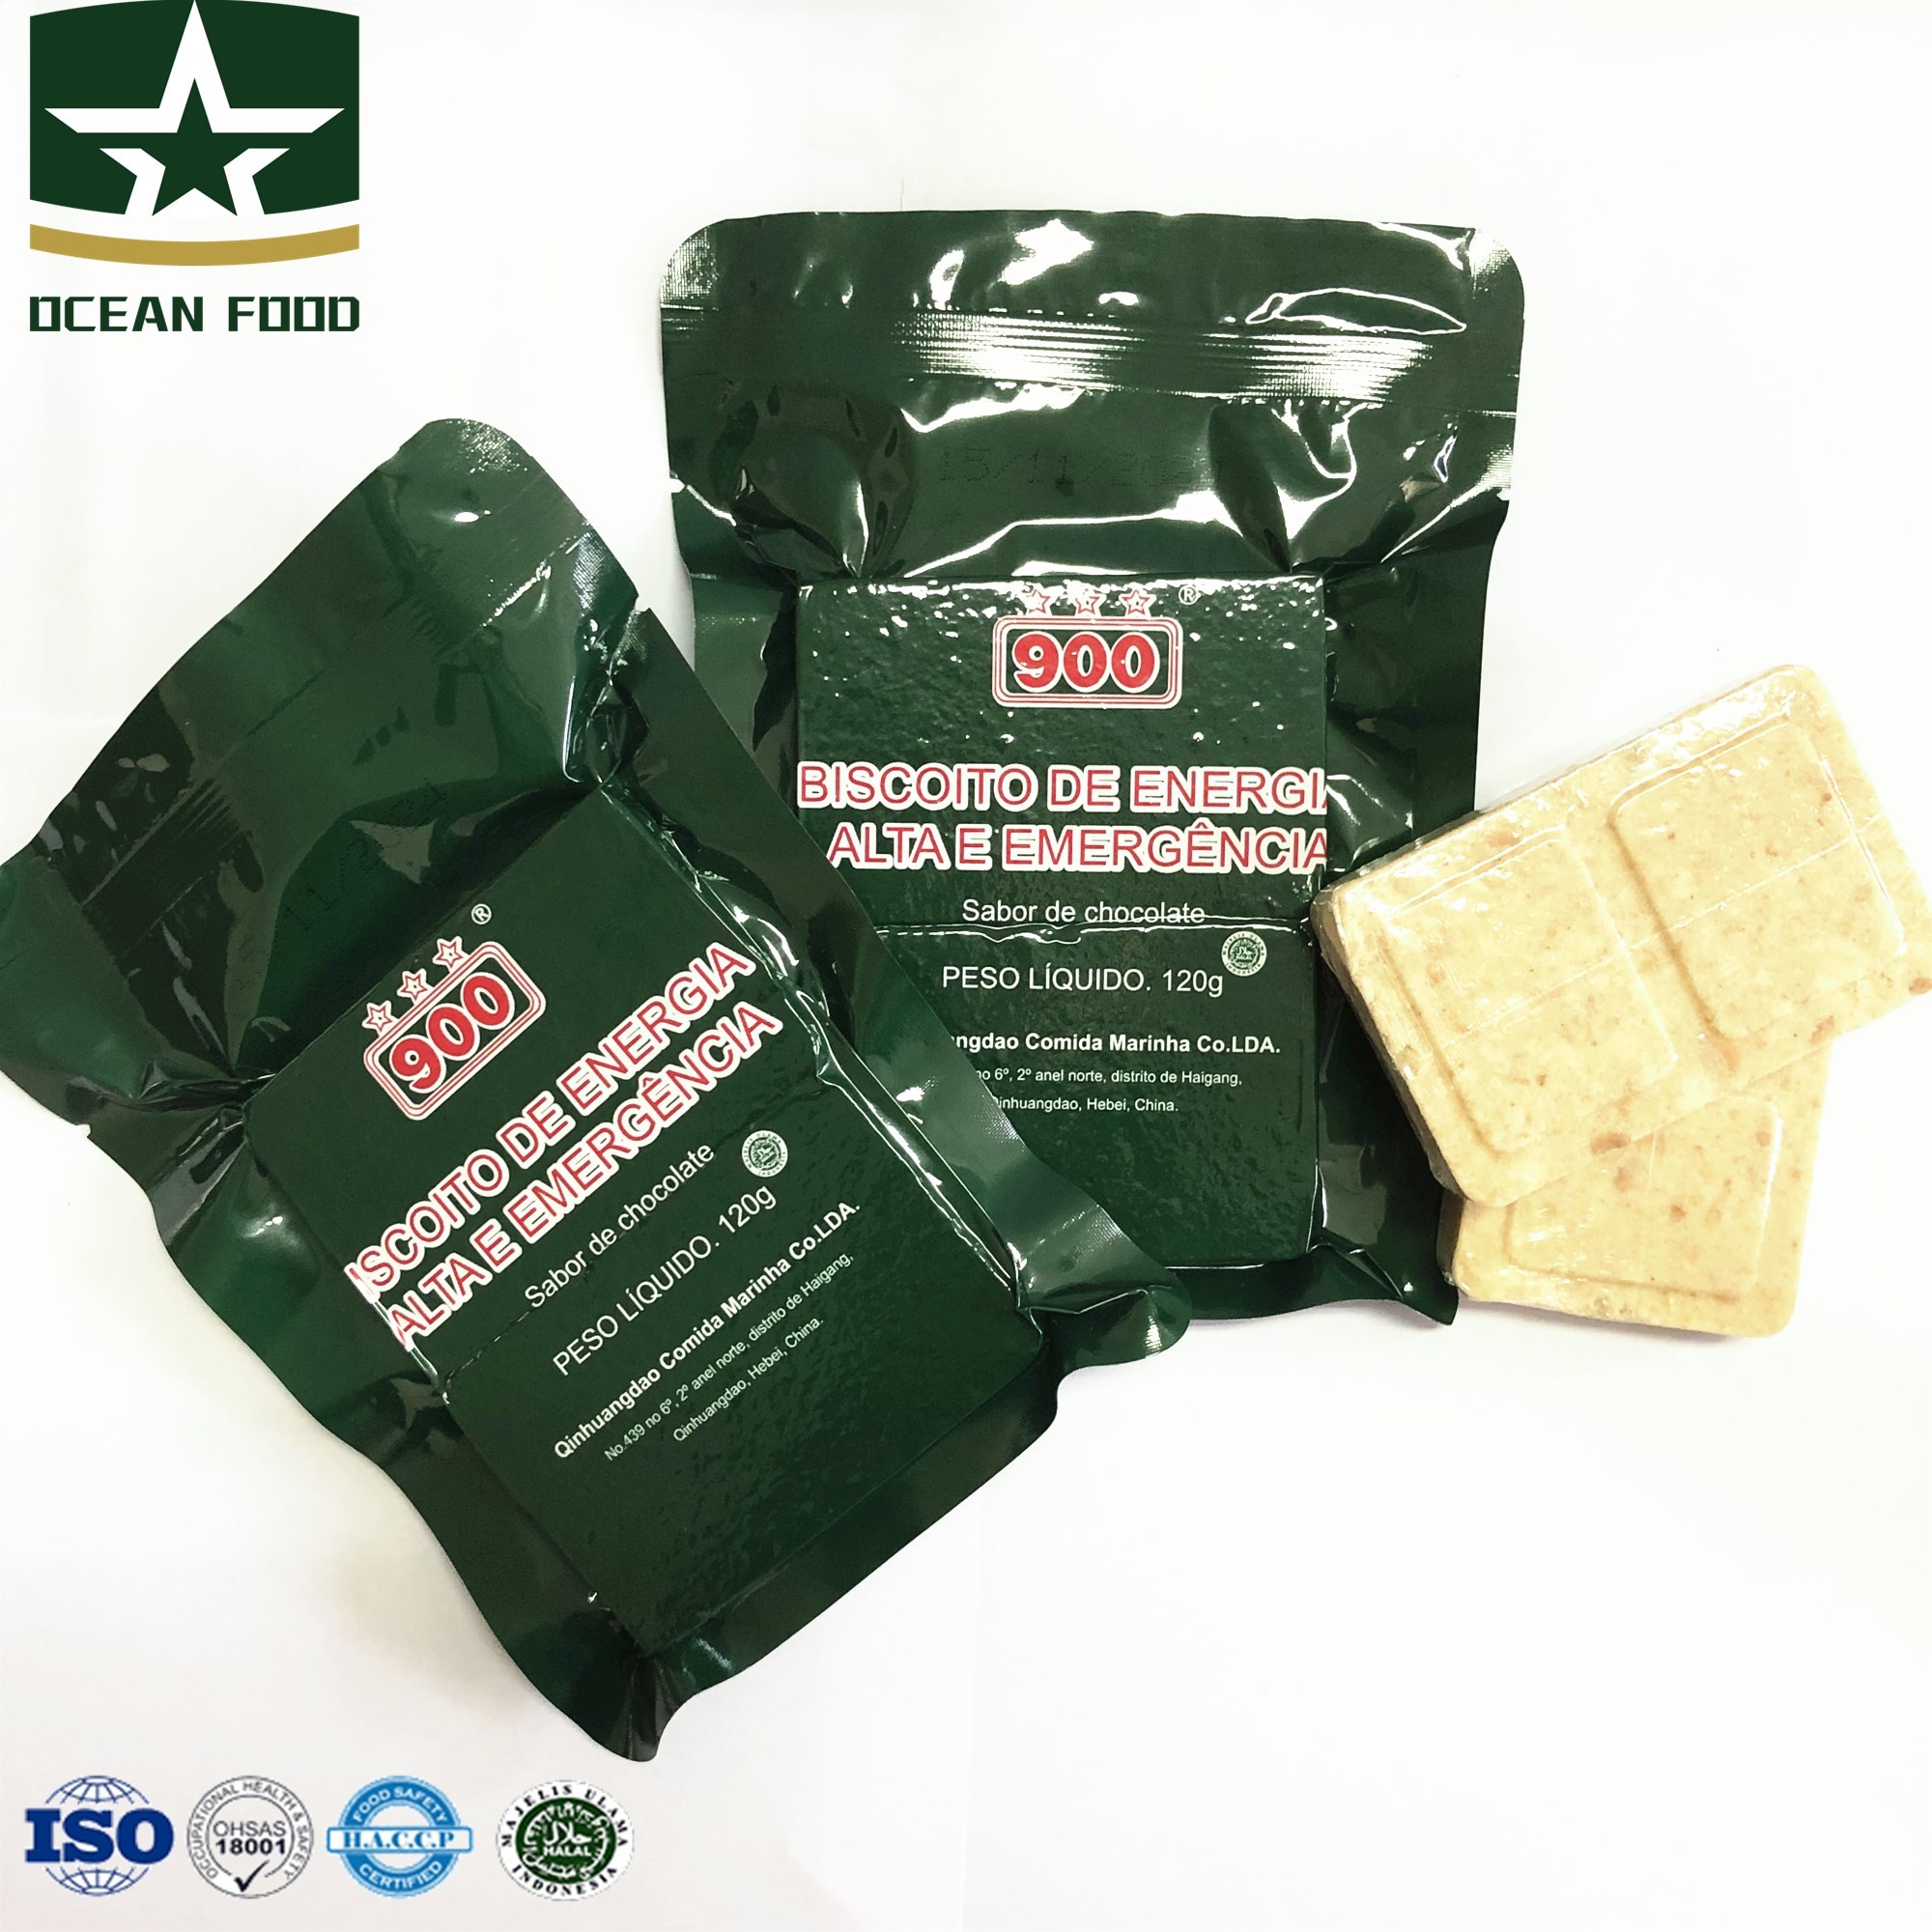 Disaster relief compressed dehydrated food,nutrrients food ration